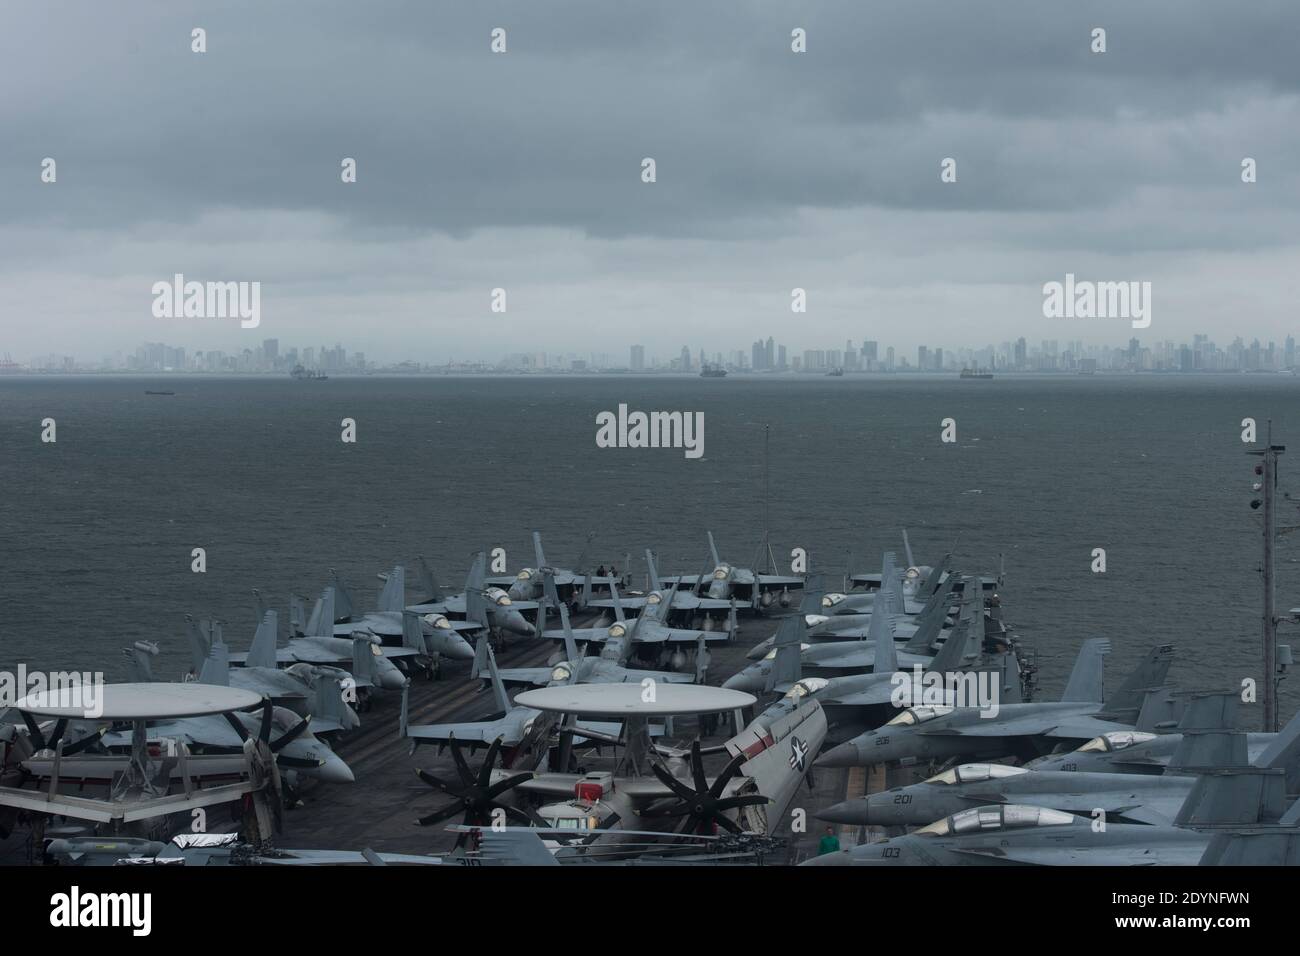 190807-N-KP021-0004 MANILA, Philippines (August 9, 2019) The aircraft carrier USS Ronald Reagan (CVN 76) anchors outside Manila, Philippines. Ronald Reagan is forward-deployed to the U.S. 7th Fleet area of operations in support of security and stability in the Indo-Pacific region. Stock Photo